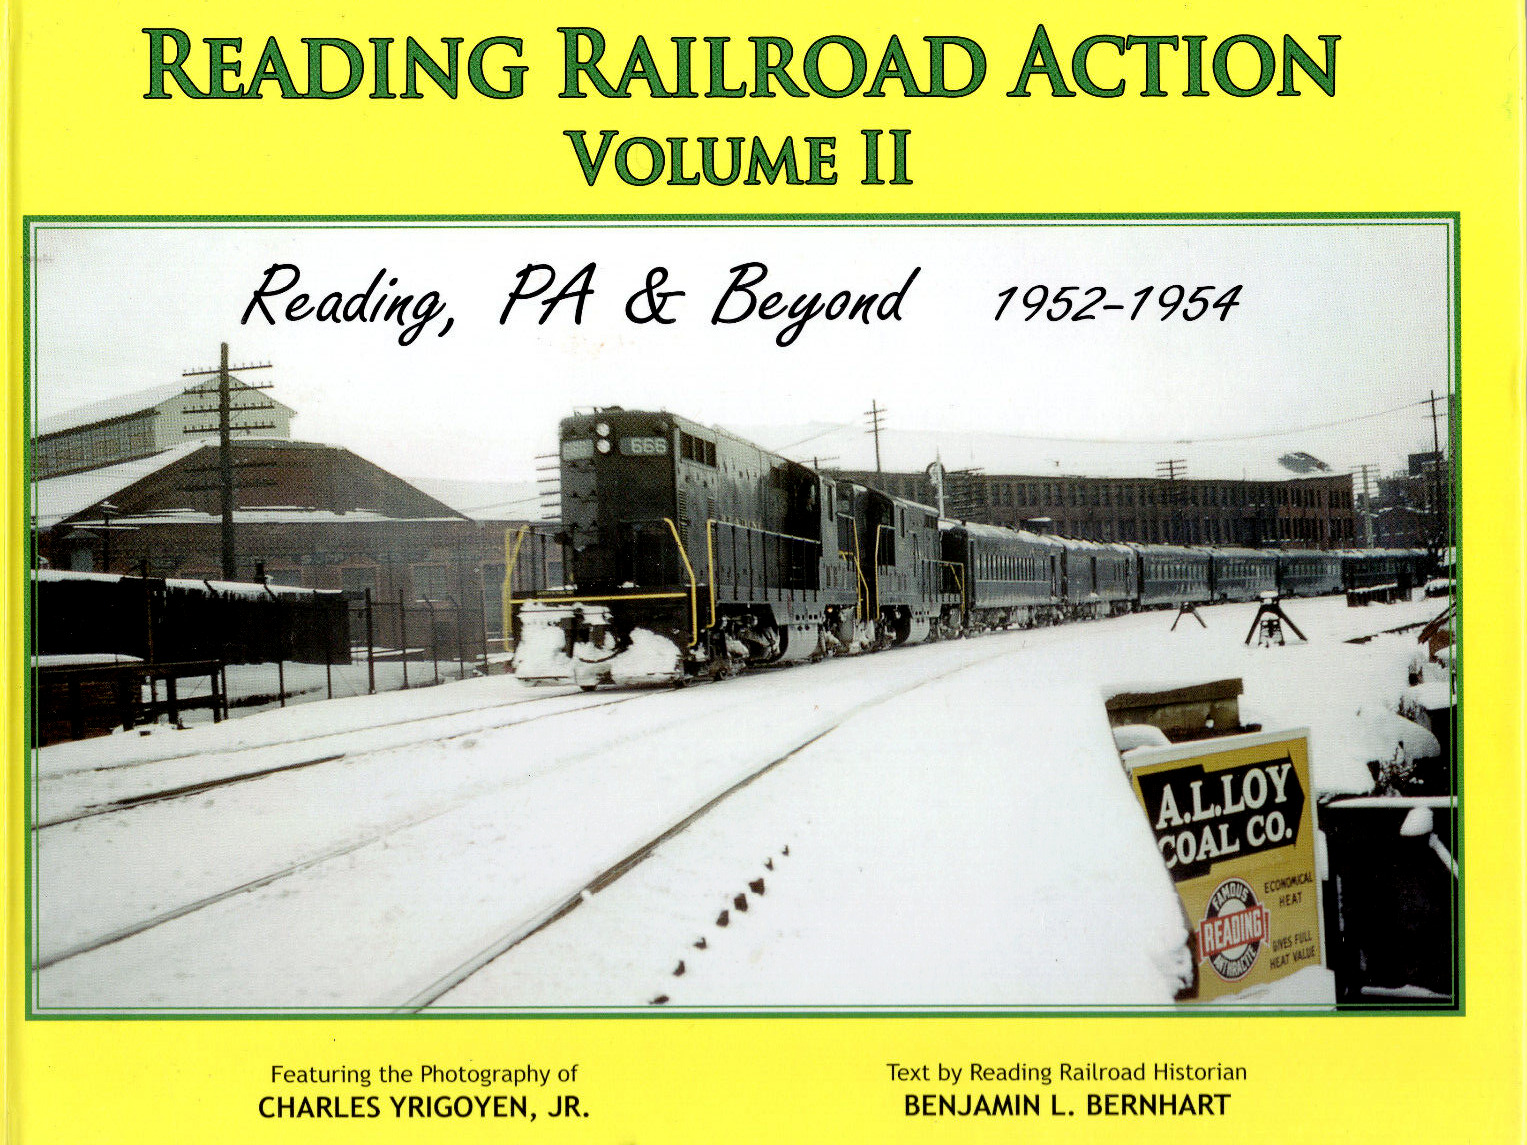 Reading Railroad Action - READING, PENNSYLVANIA and Beyond, 1952-1954 (NEW BOOK)